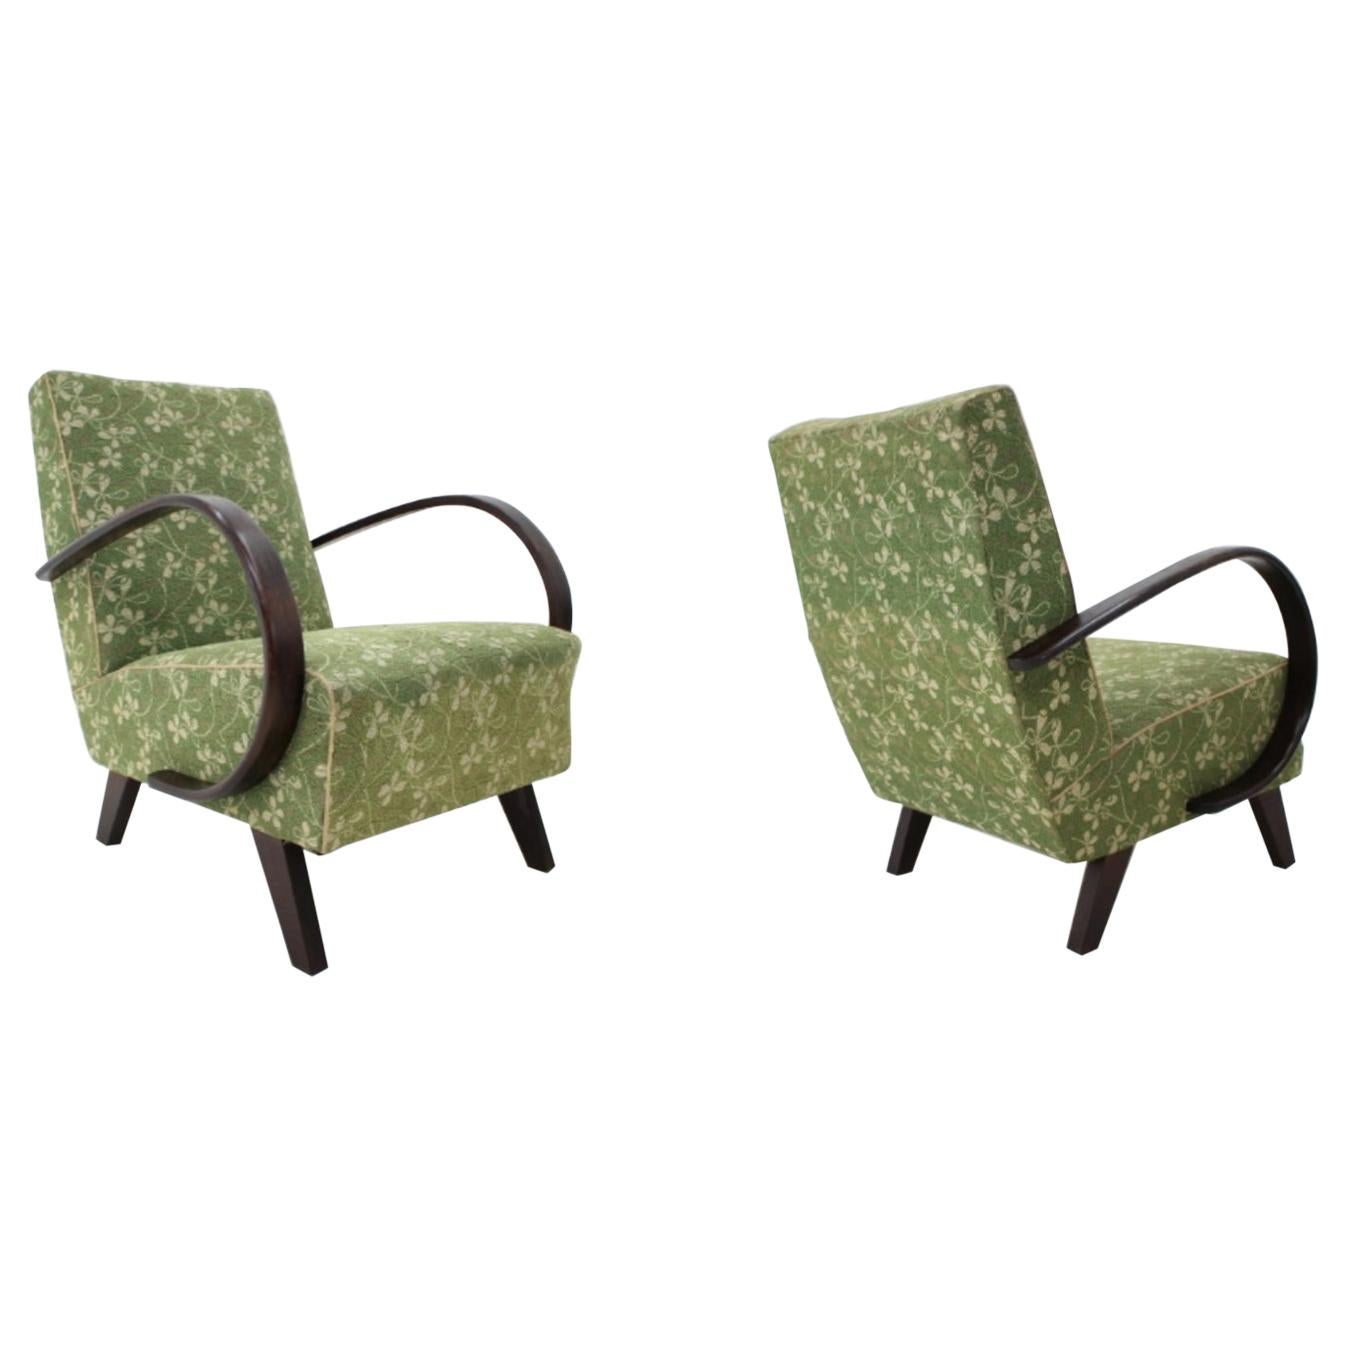 Pair of Art Deco Armchairs Designed by Jindrich Halabala, 1930s